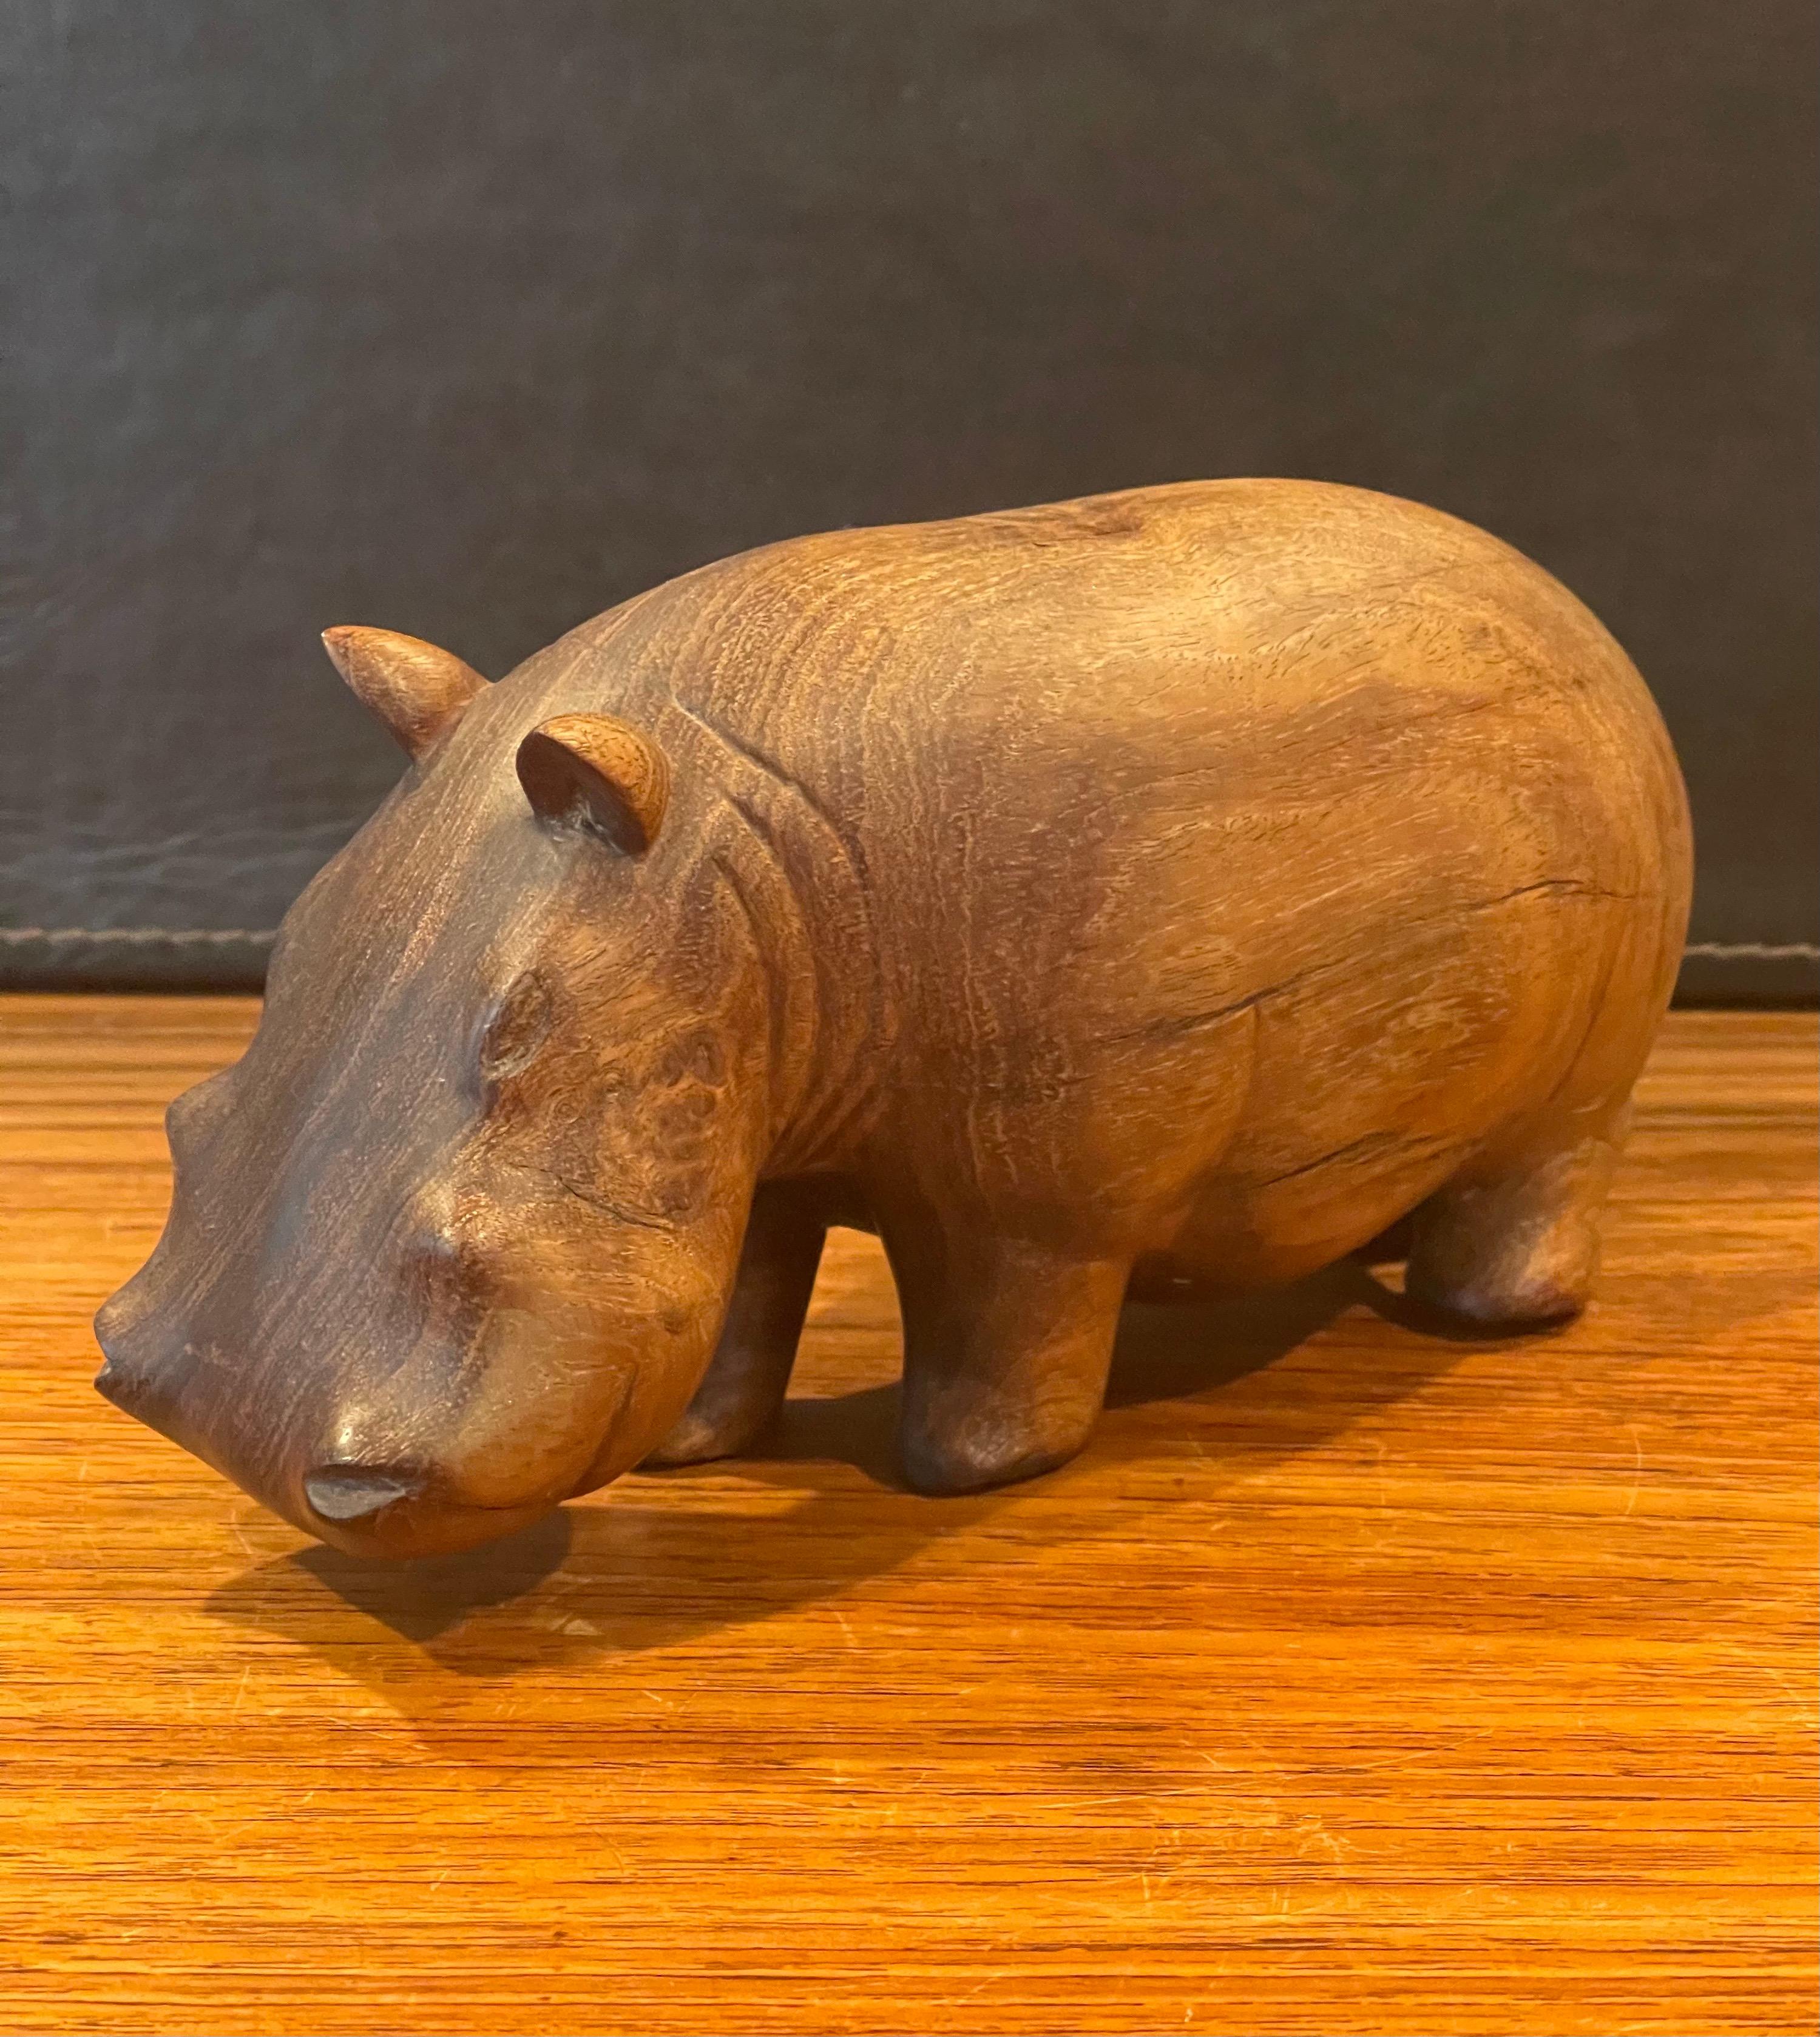 A very nice solid walnut hand carved figural hippopotamus sculpture, circa 1980s. The piece is in very good condition and measures 8.5